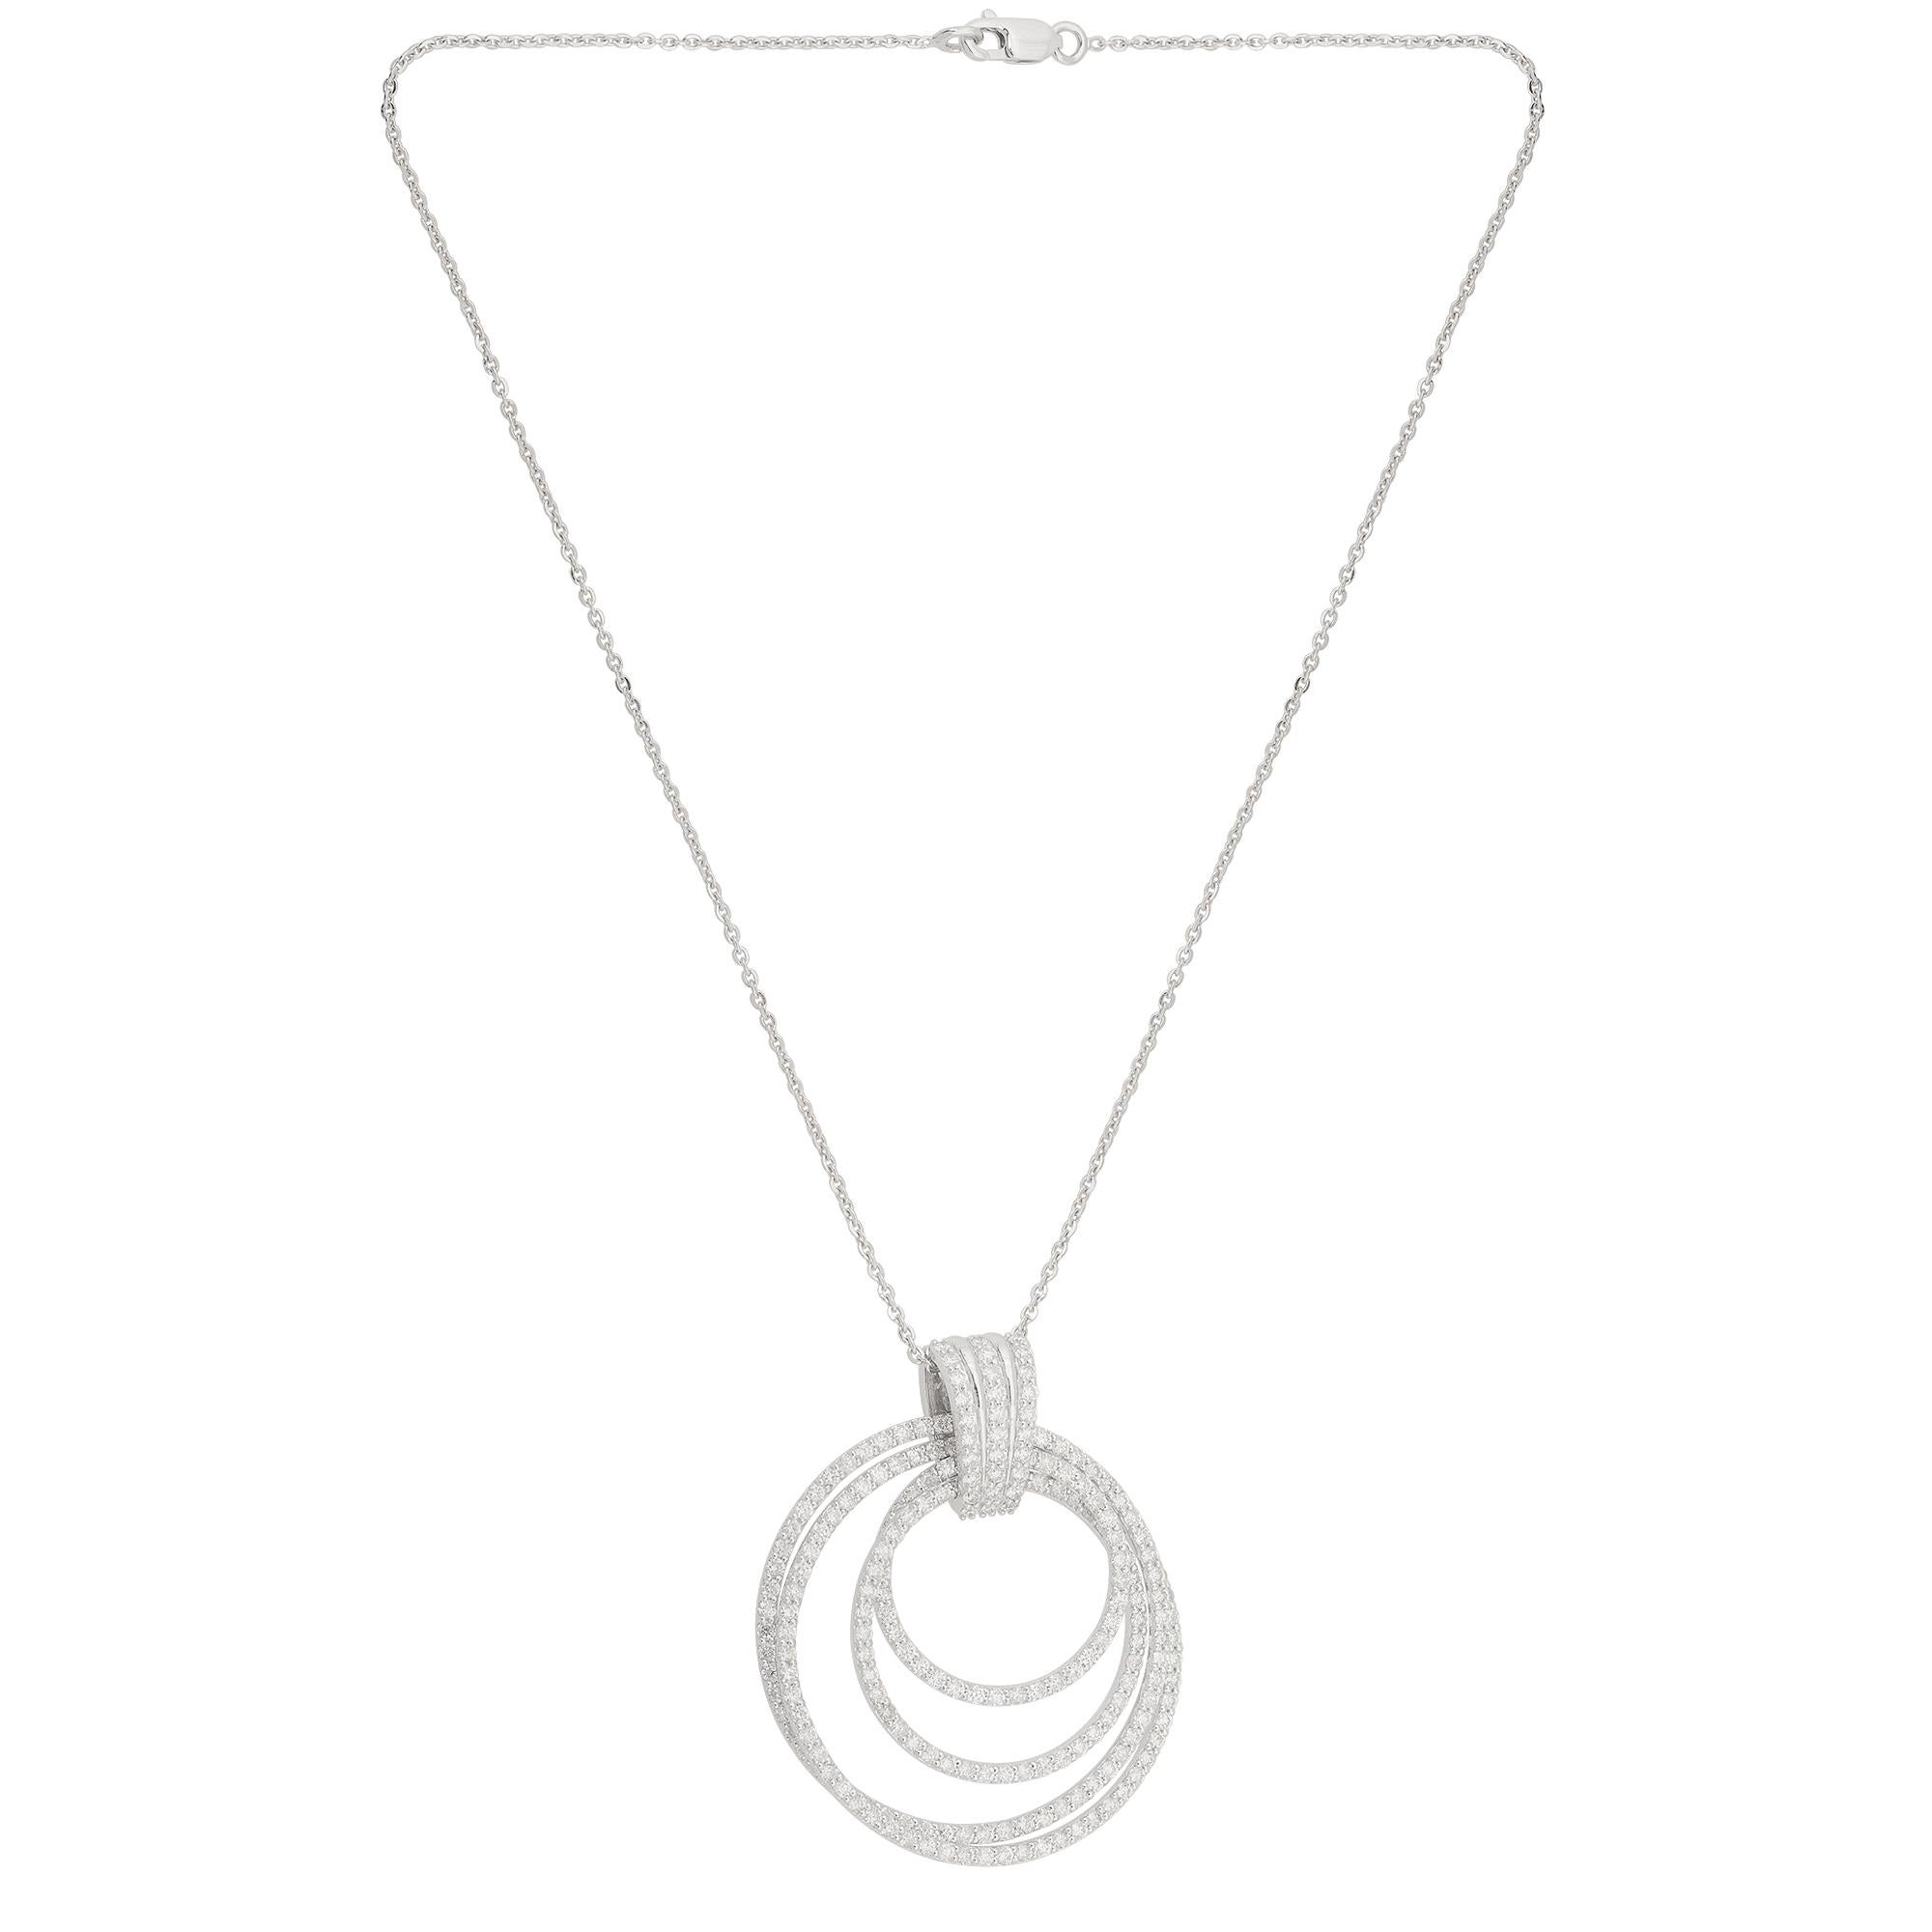 This exquisite pendant necklace showcases a collection of real diamonds with a total weight of 3.20 carats, featuring SI clarity and HI color grades. The diamonds are meticulously set in a captivating multi-circle pendant design crafted from 14